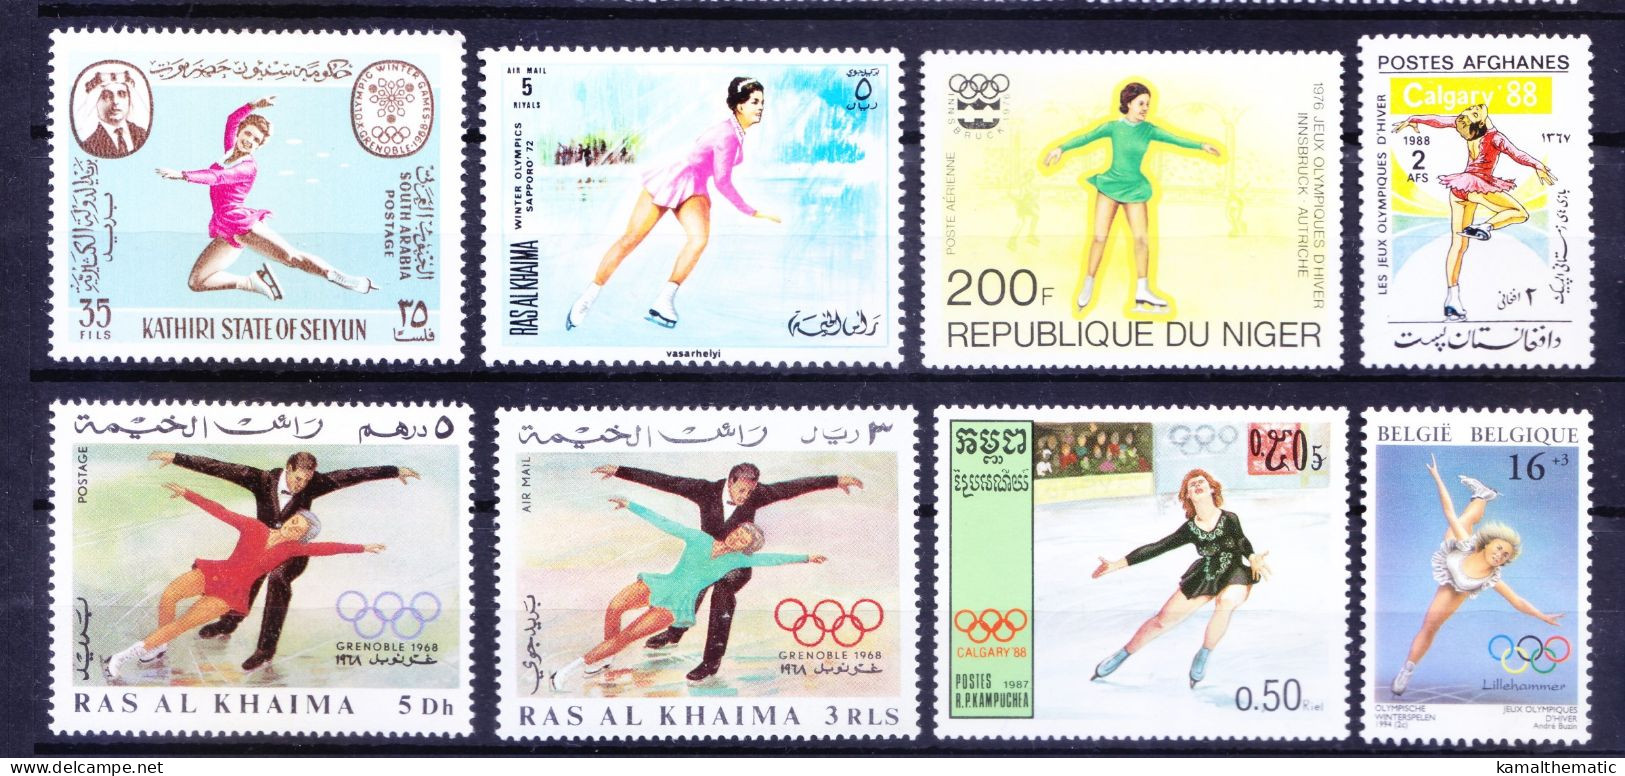 Figure Skating, winter sports Olympics, 50 Different MNH stamps, Rare collection